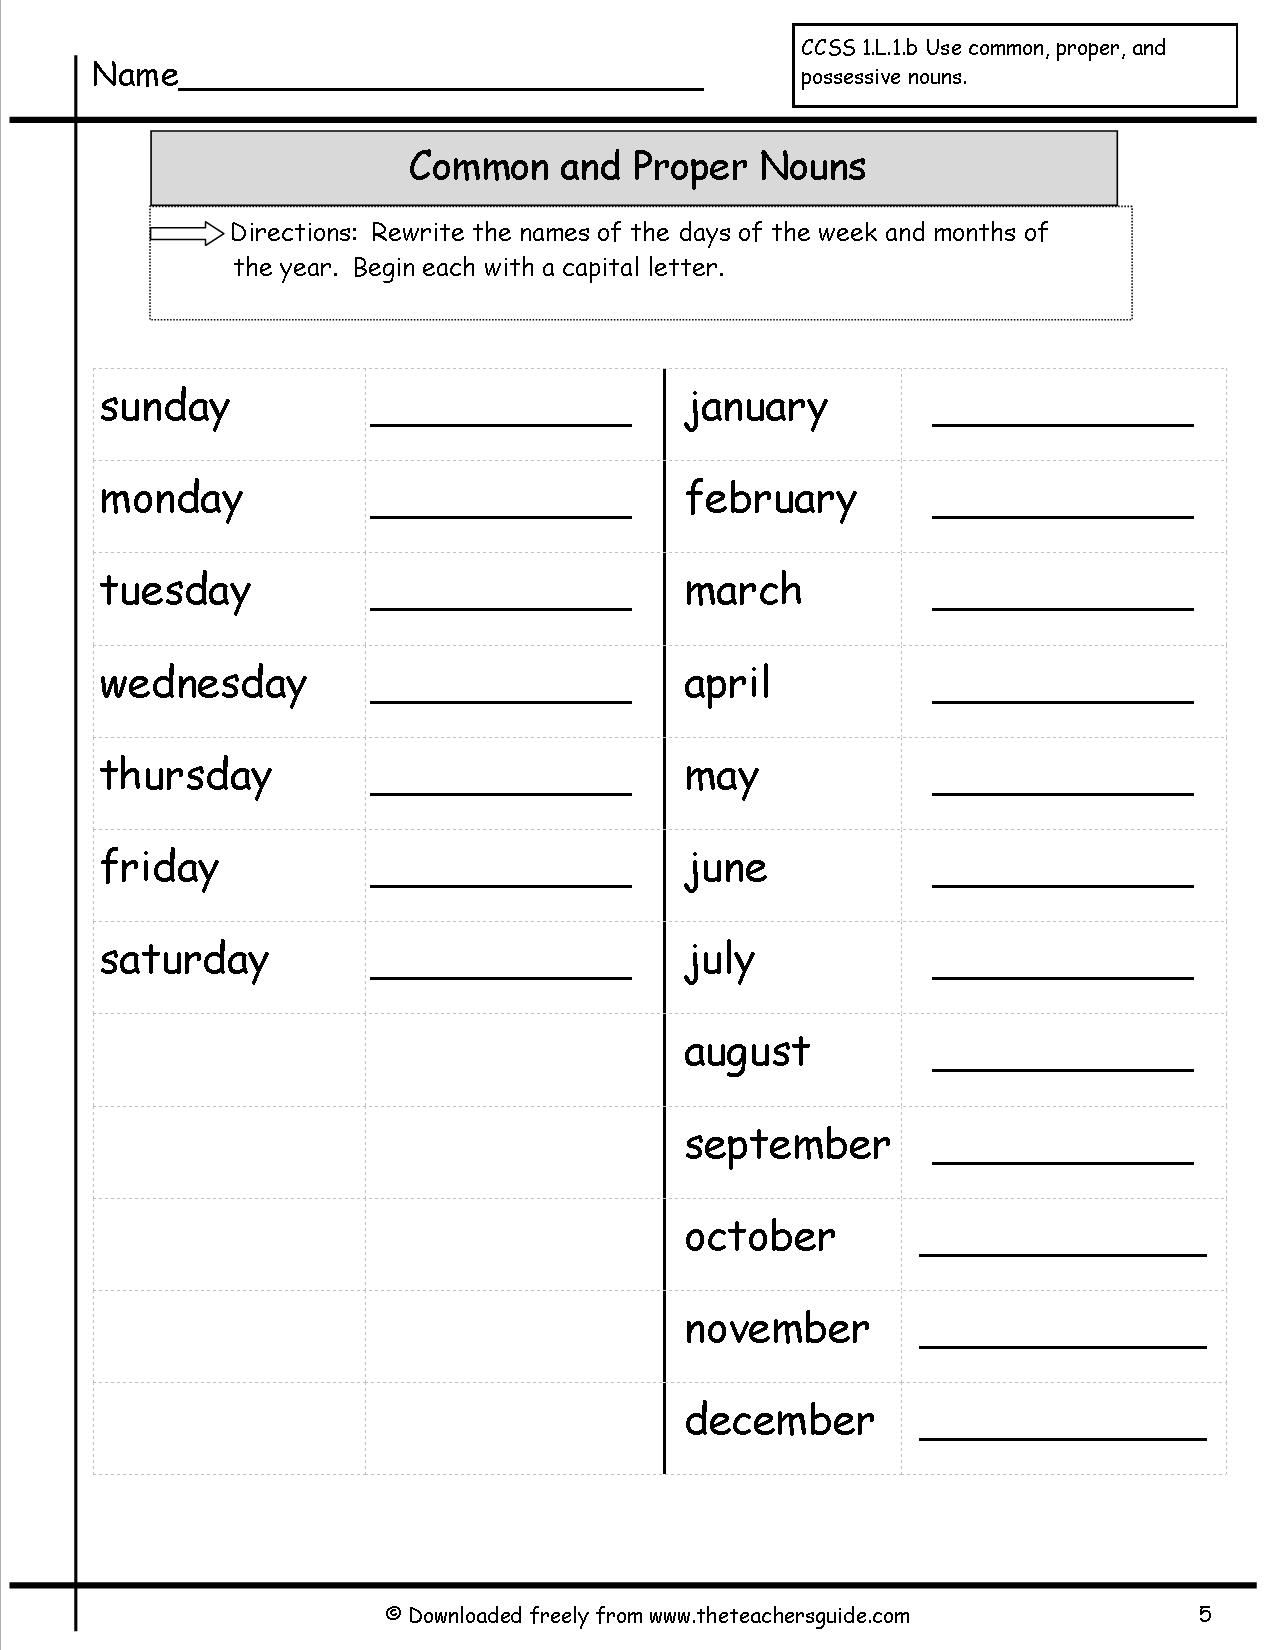 4th-grade-common-and-proper-nouns-worksheets-for-grade-4-with-answers